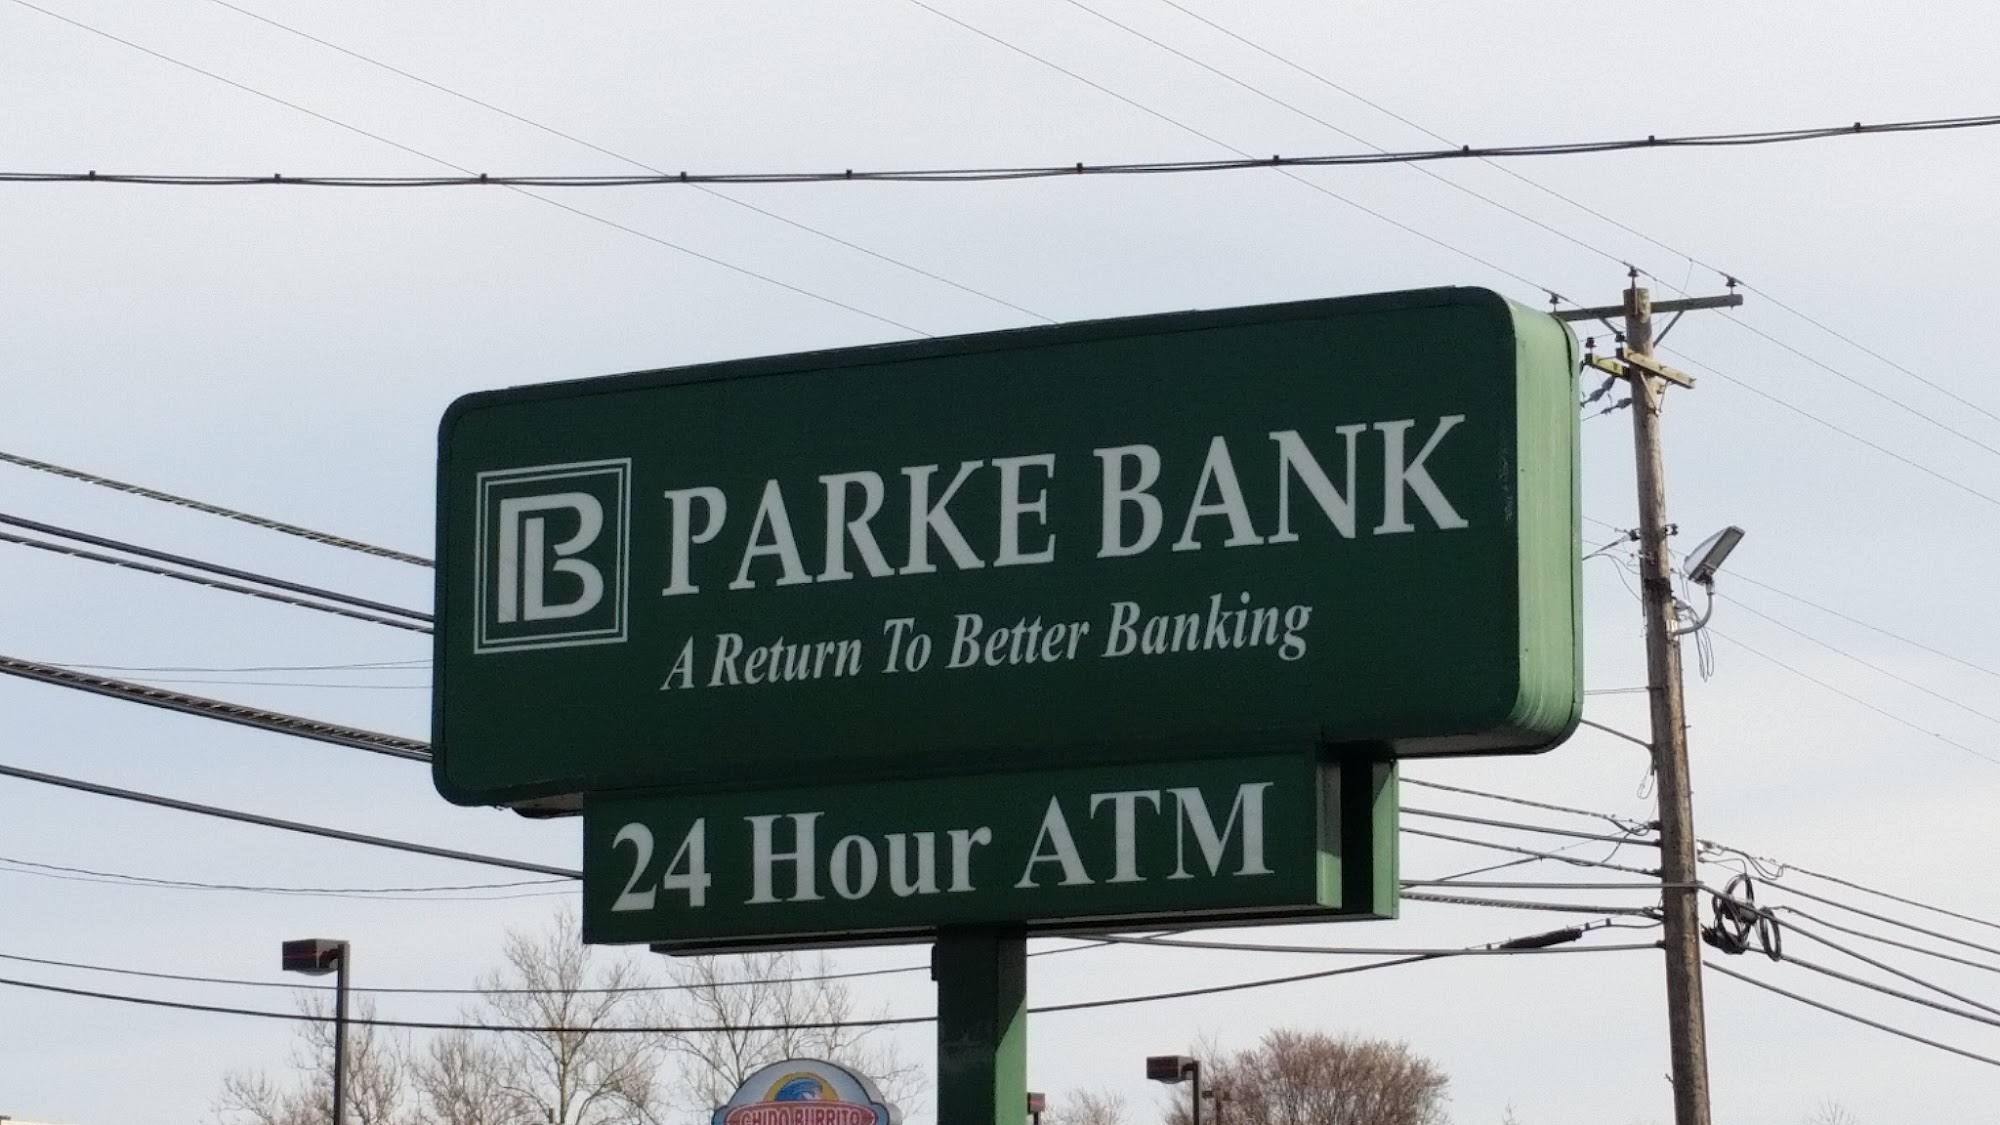 Parke Bank (with Drive-Thru/ATM)